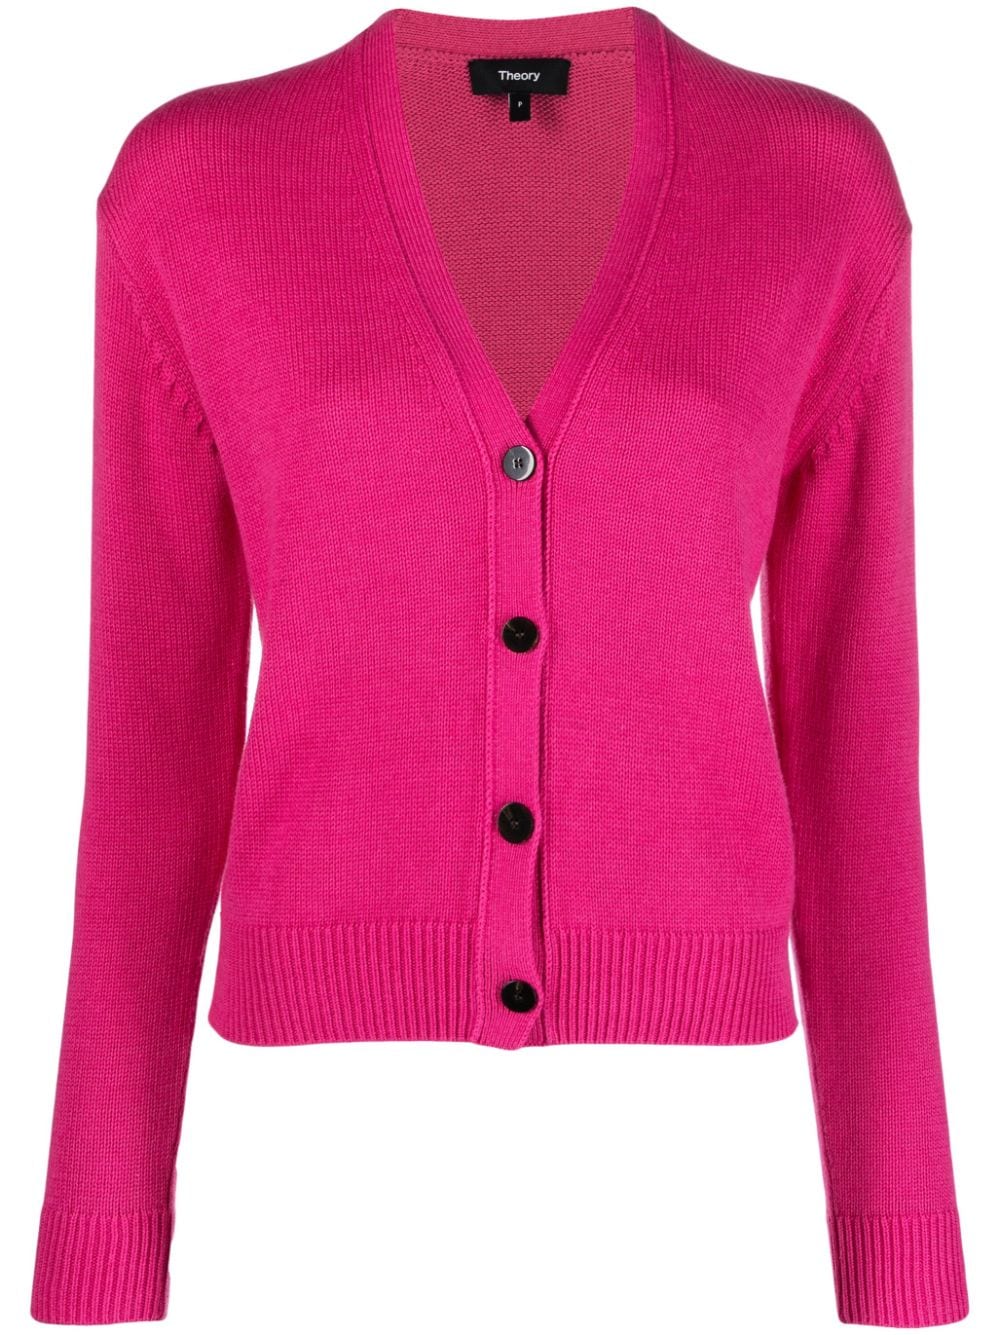 Theory V-neck knitted cardigan - Pink